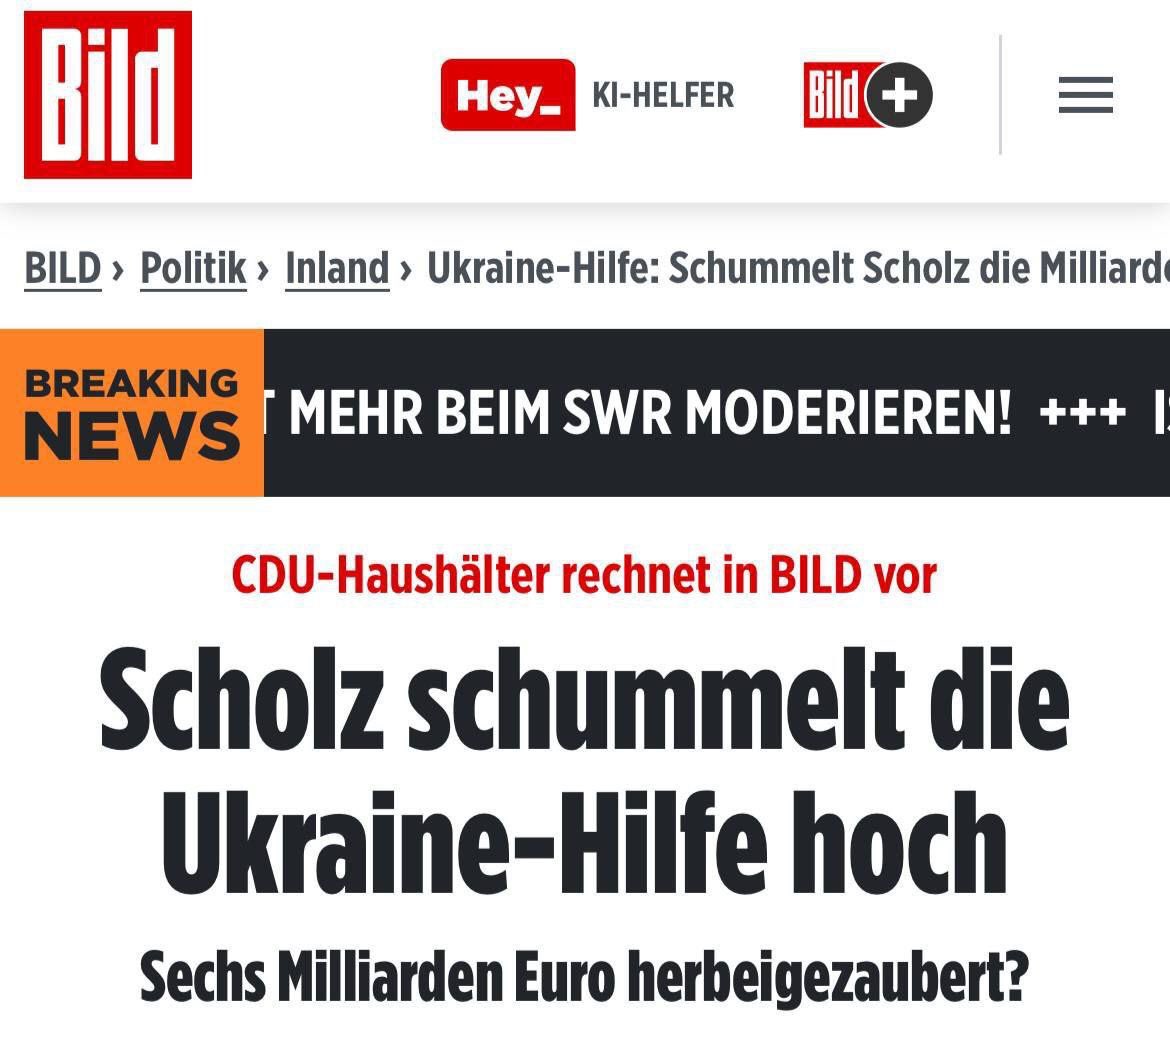 Olaf Scholz is cheating on Ukraine aid. Germany has provided Ukraine with less weapons and funds than it claims - Bild with reference to Bundestag deputy Gedehens. The government of Germany notes that our country received military aid in the amount of €28 billion, but the data…